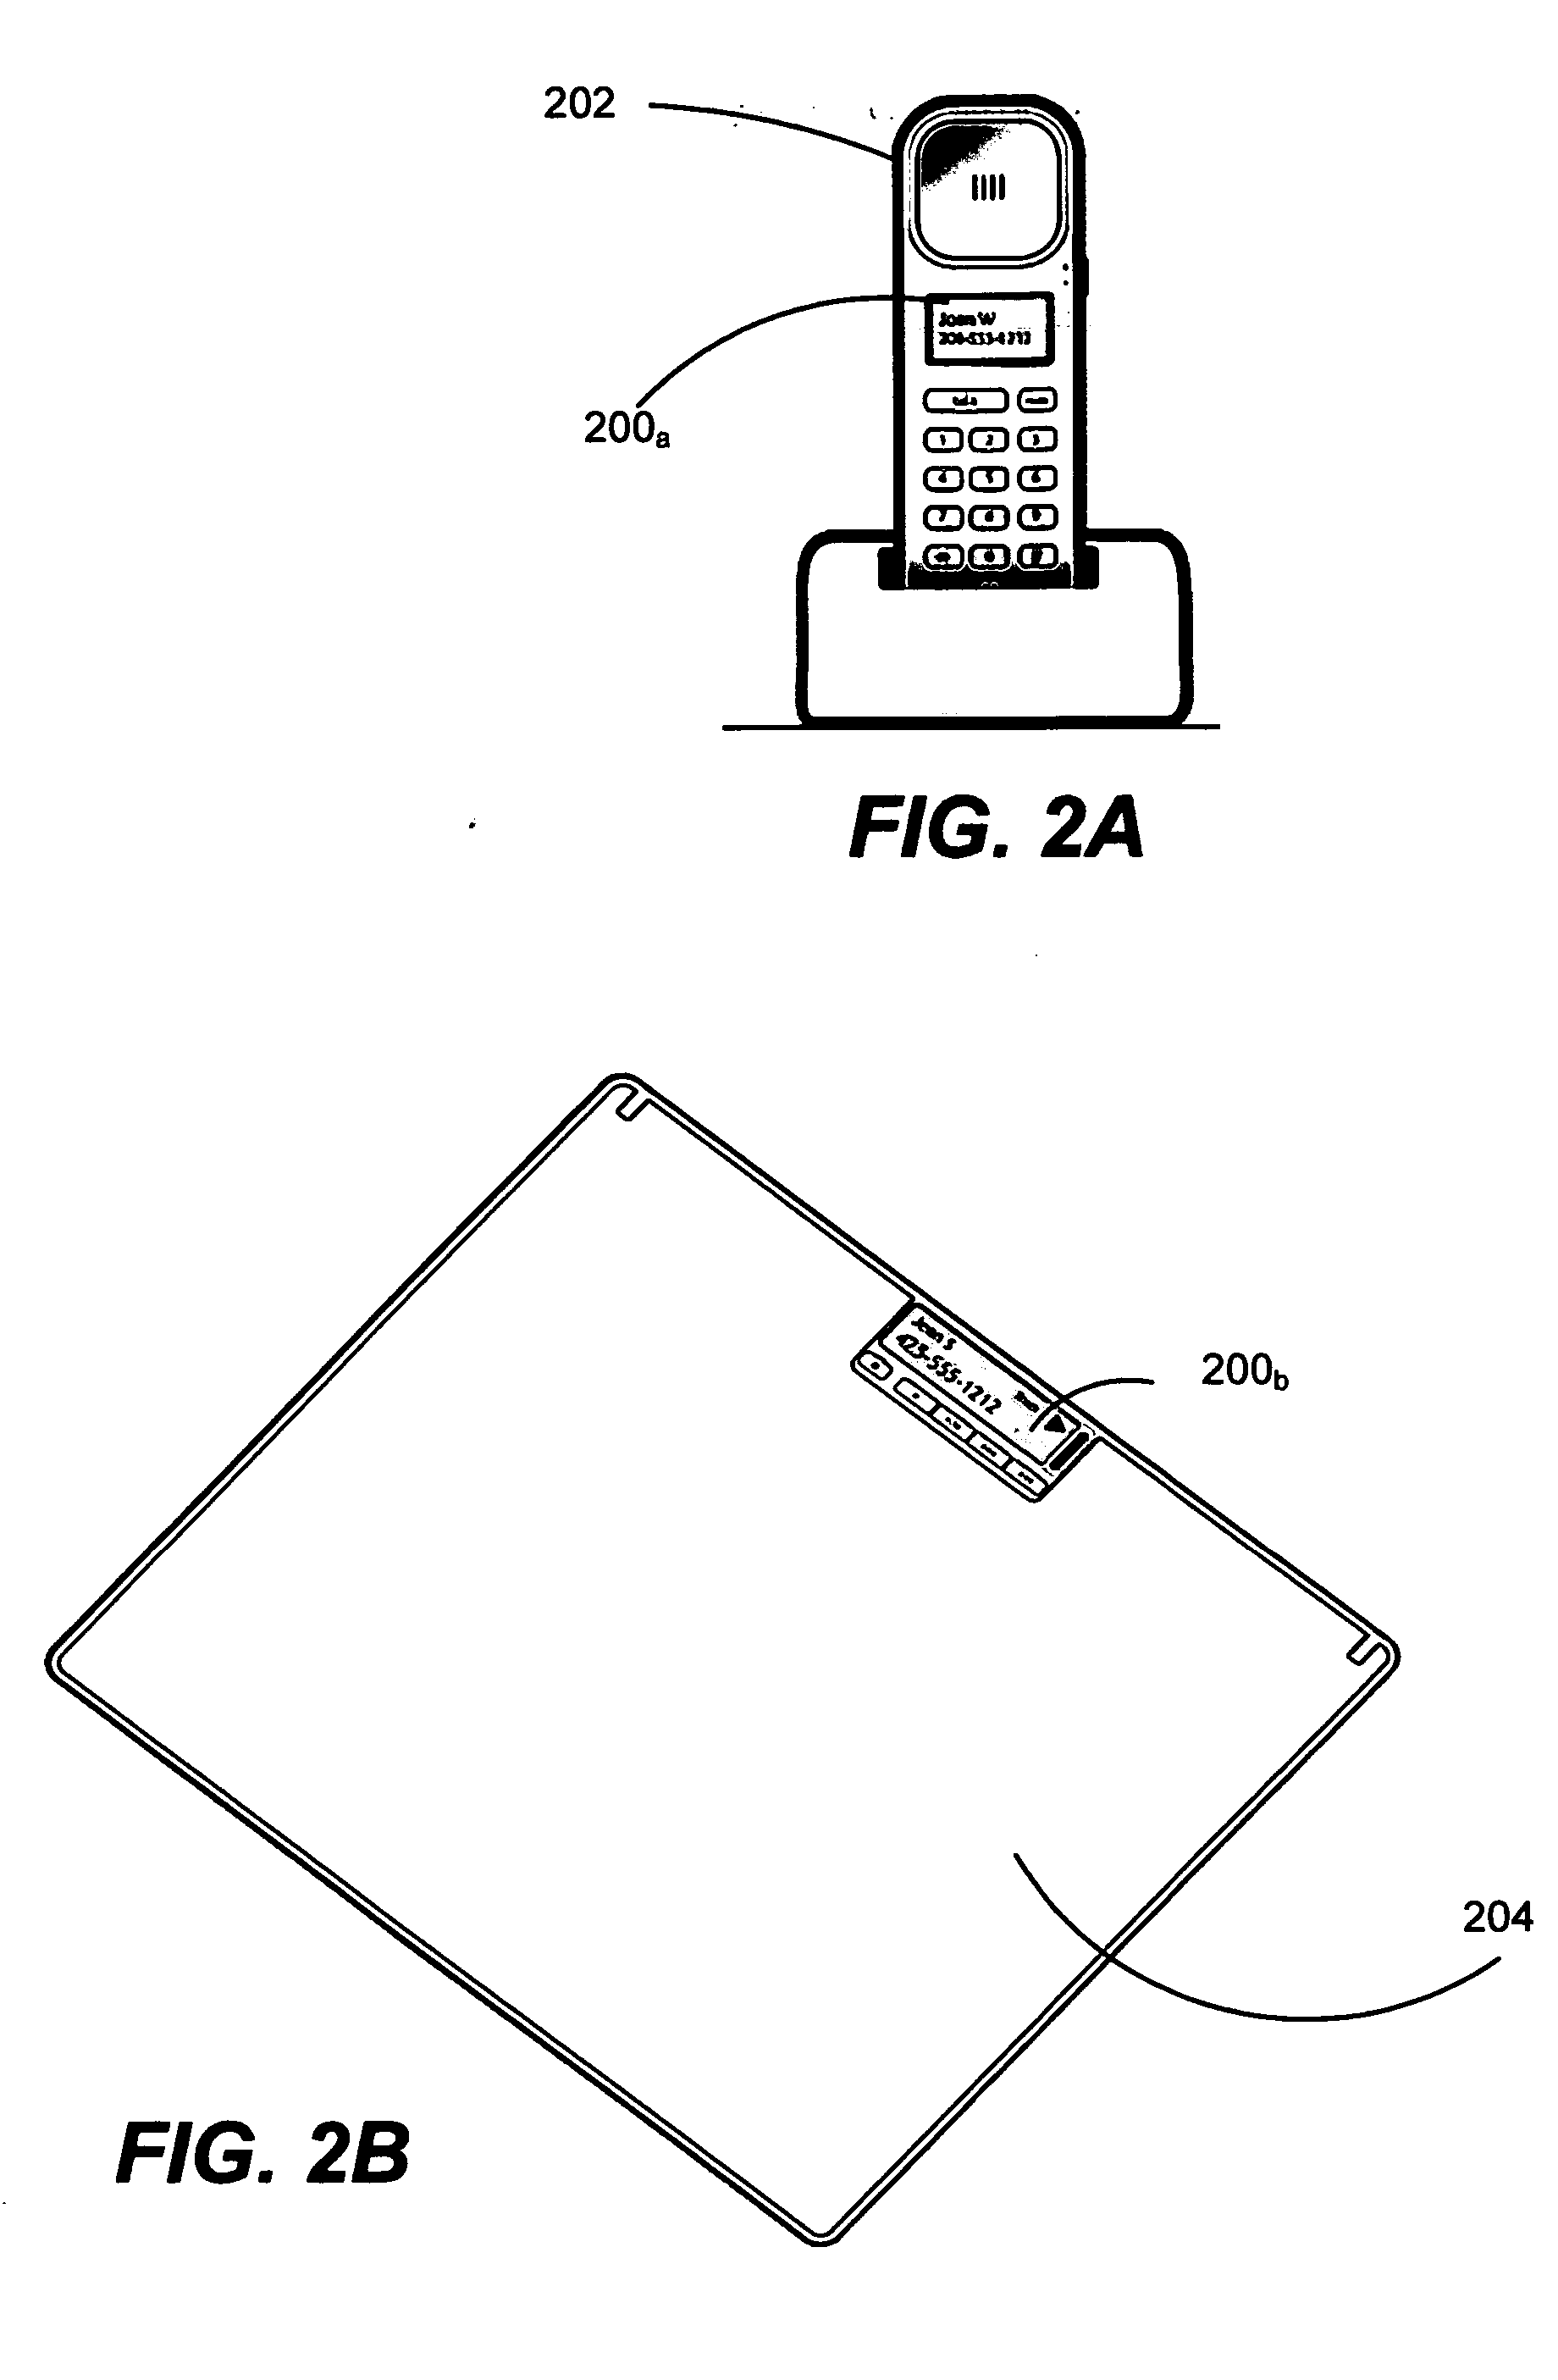 Simple content format for auxiliary display devices